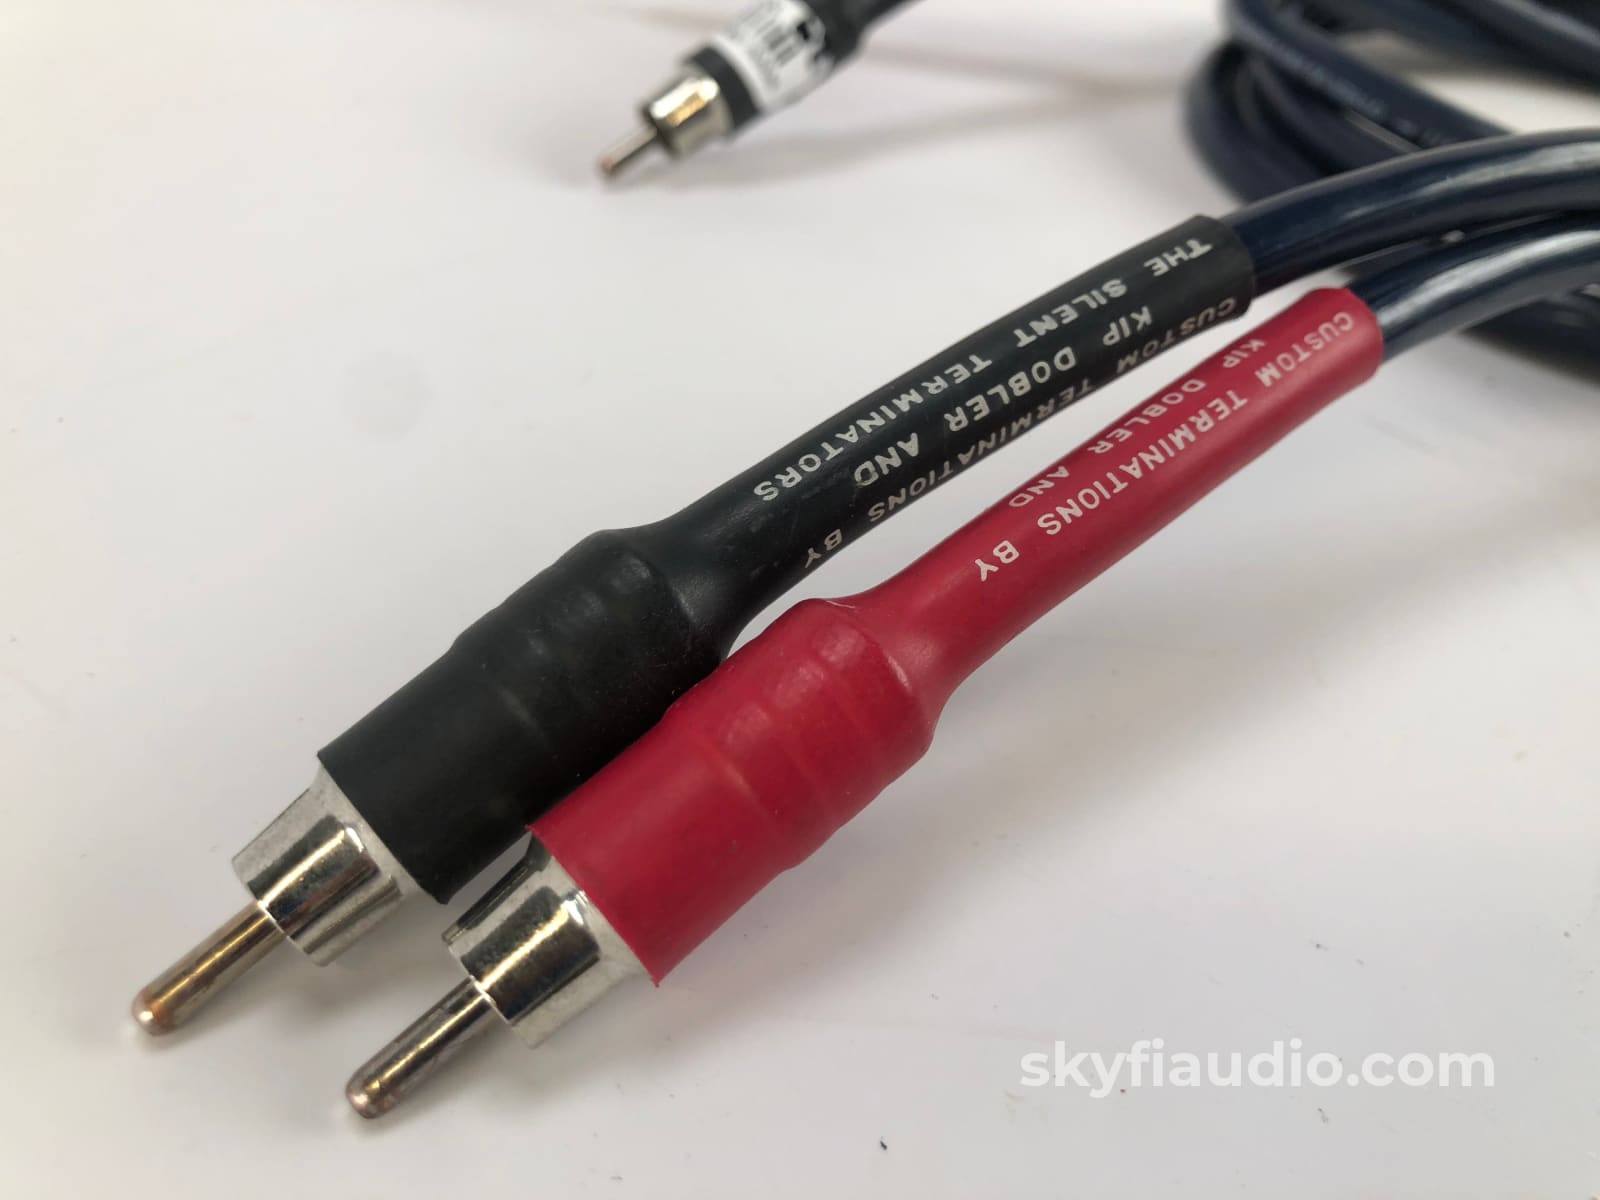 Cardas Audio - 300B Microtwin Rca Cable 2M Cables